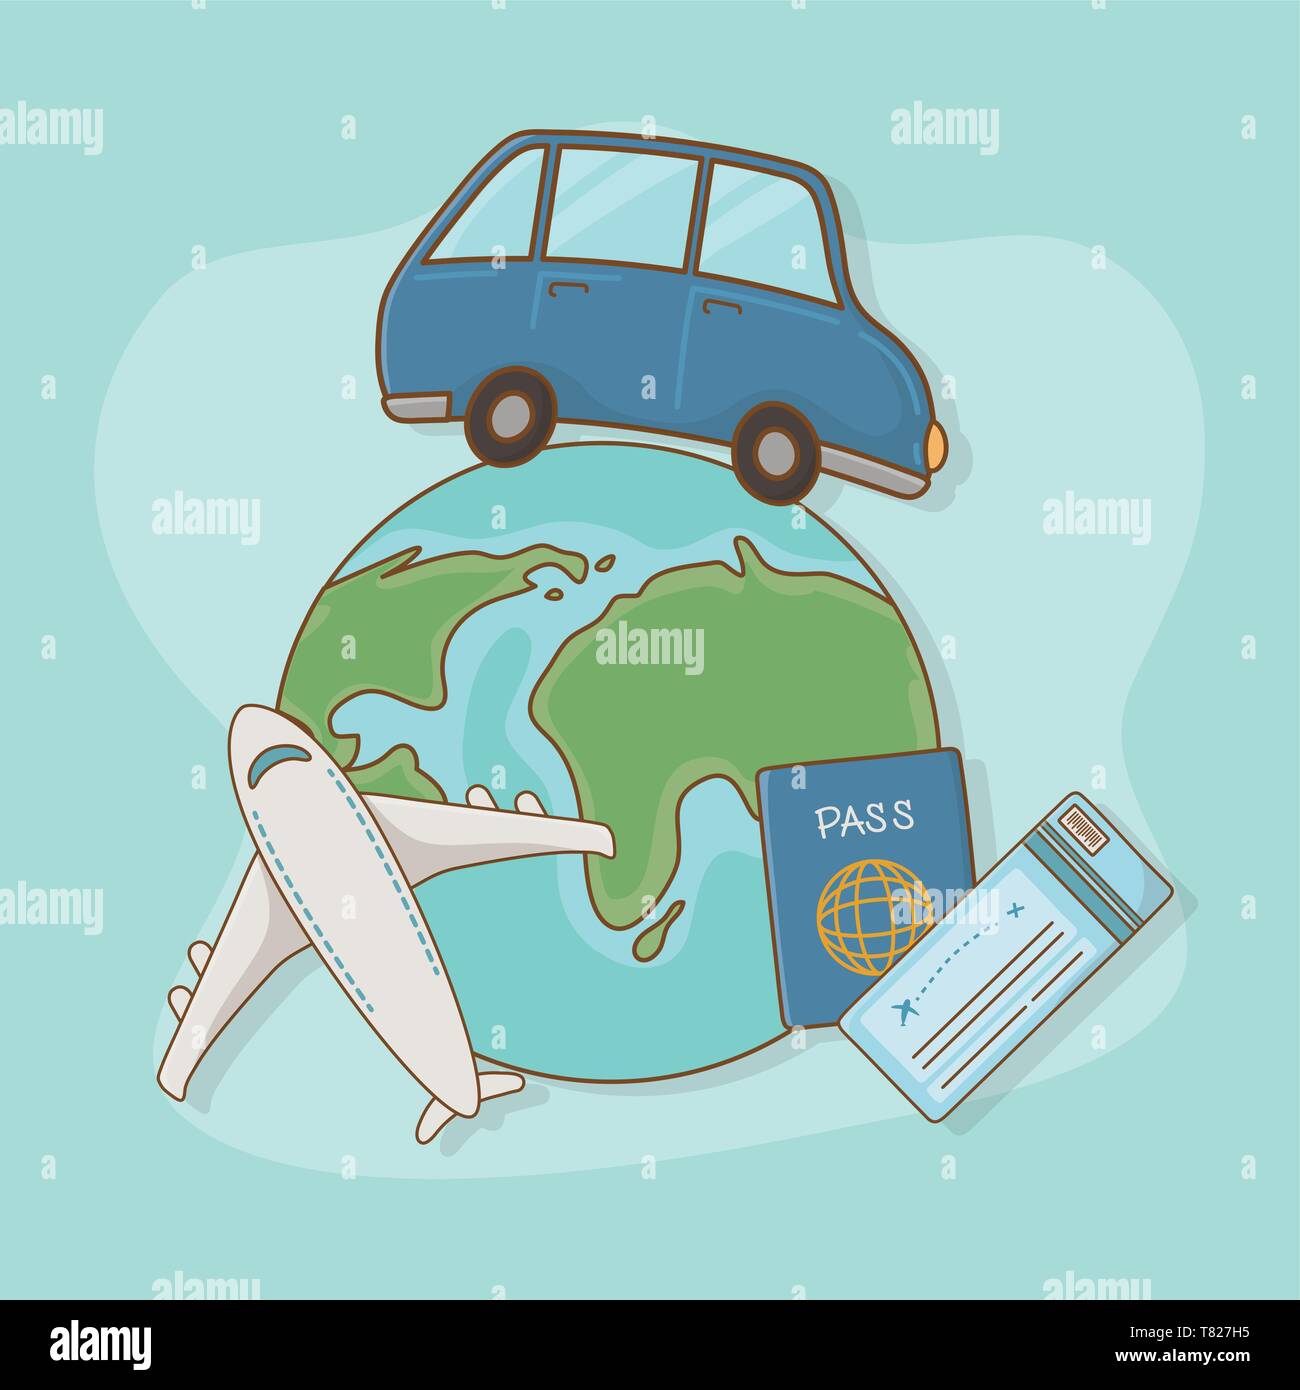 world planet with car and travel vacations items vector illustration design Stock Vector